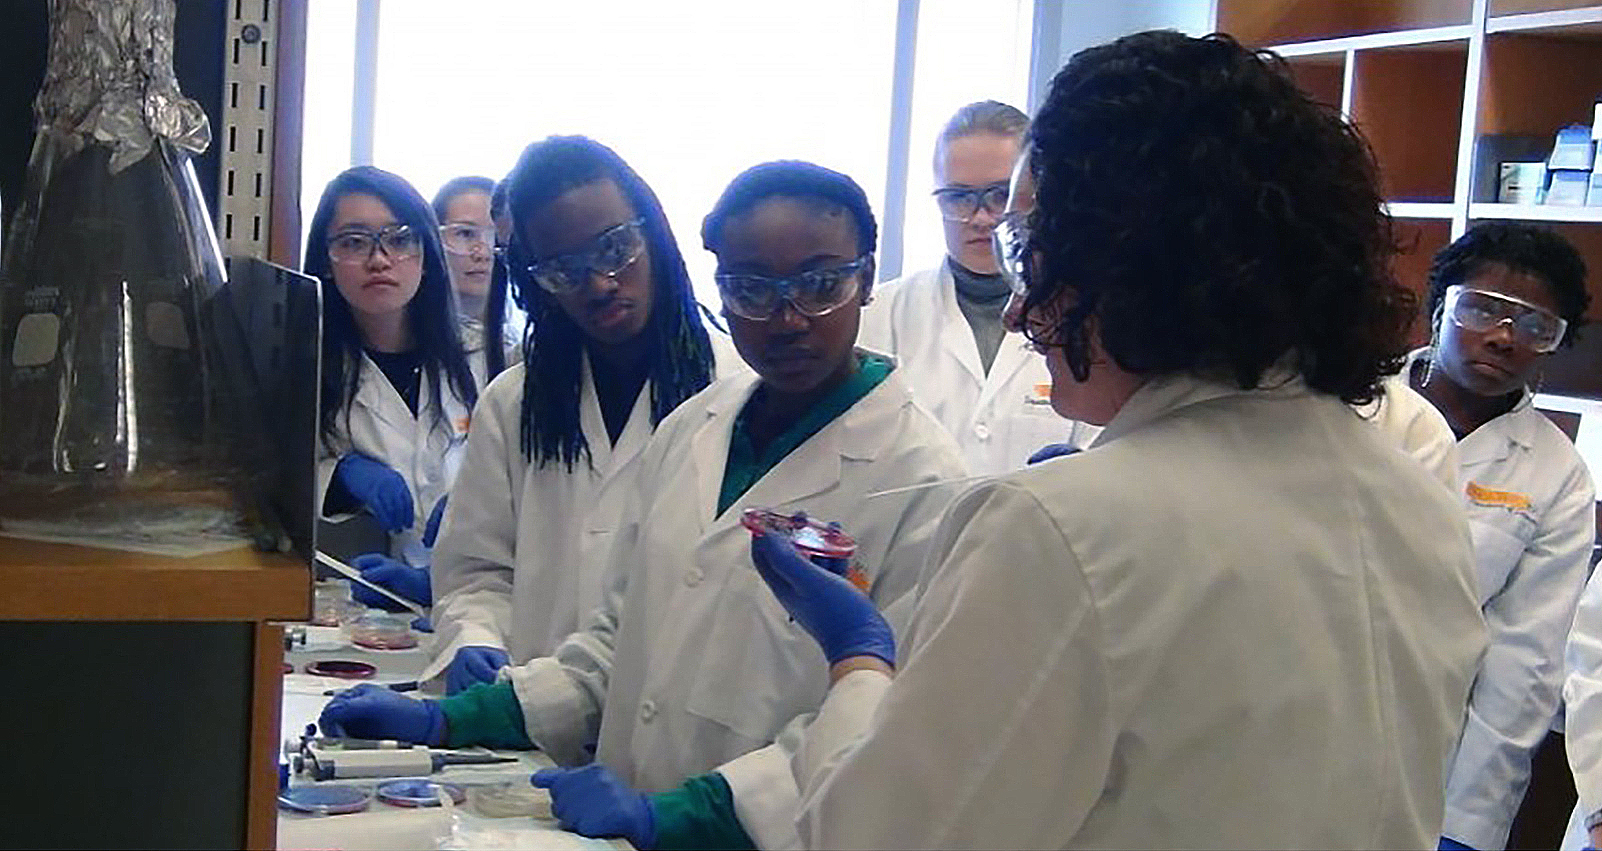 high school students in lab coats face an instructor in a reproductive science lab.